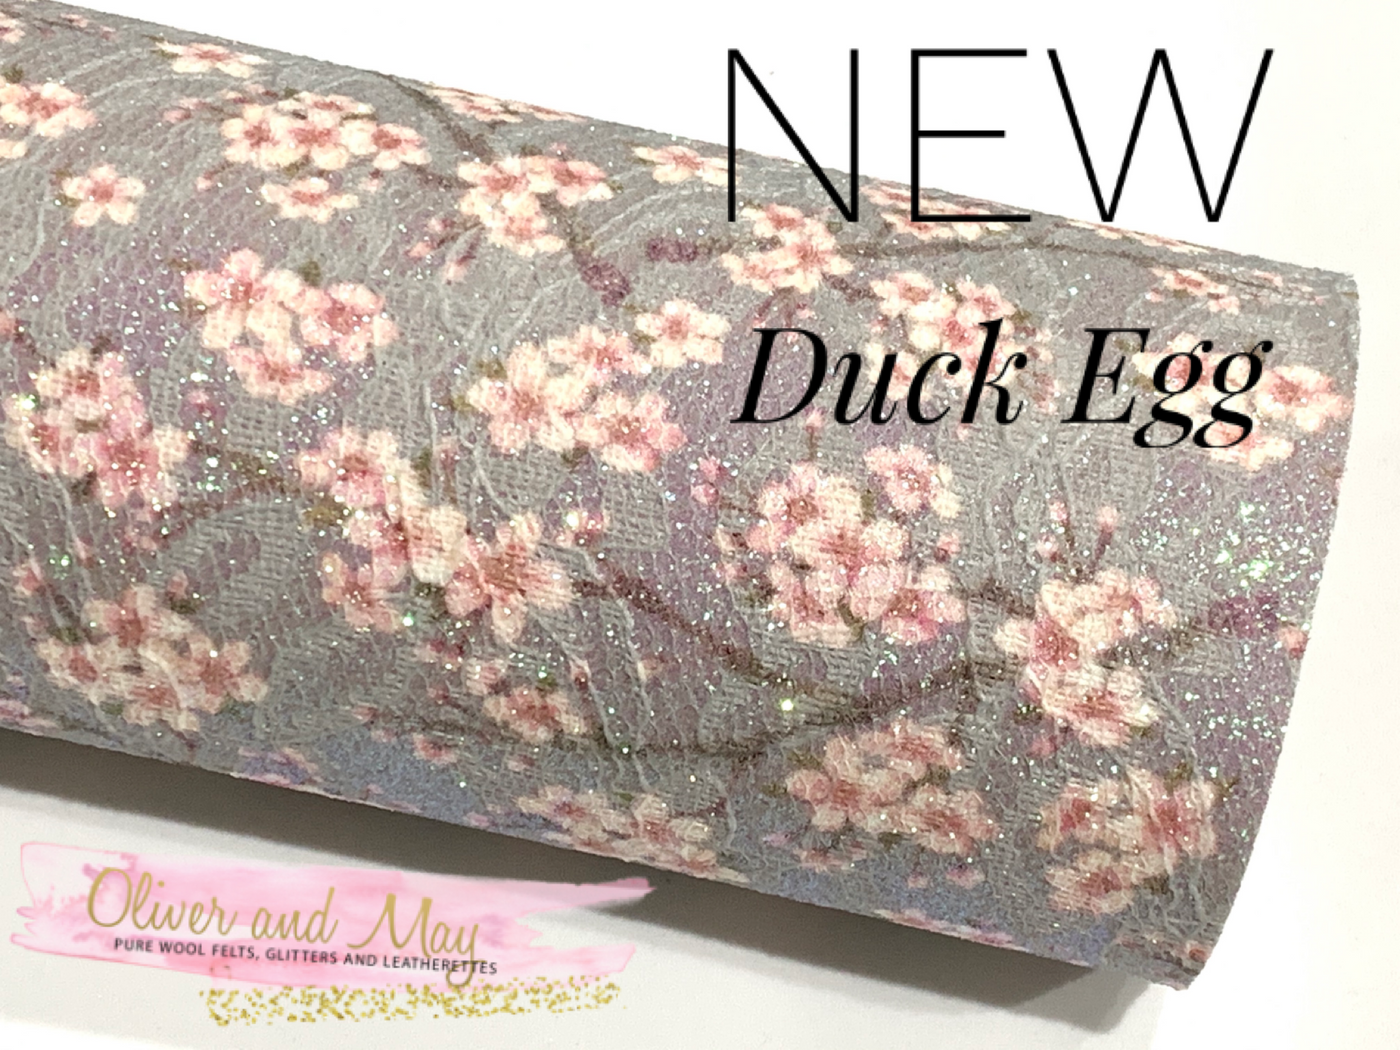 Floral Blossom Glitter Lace Fabric Sheet A3 A4 A5 - NEW Duck Egg Glitter Lace